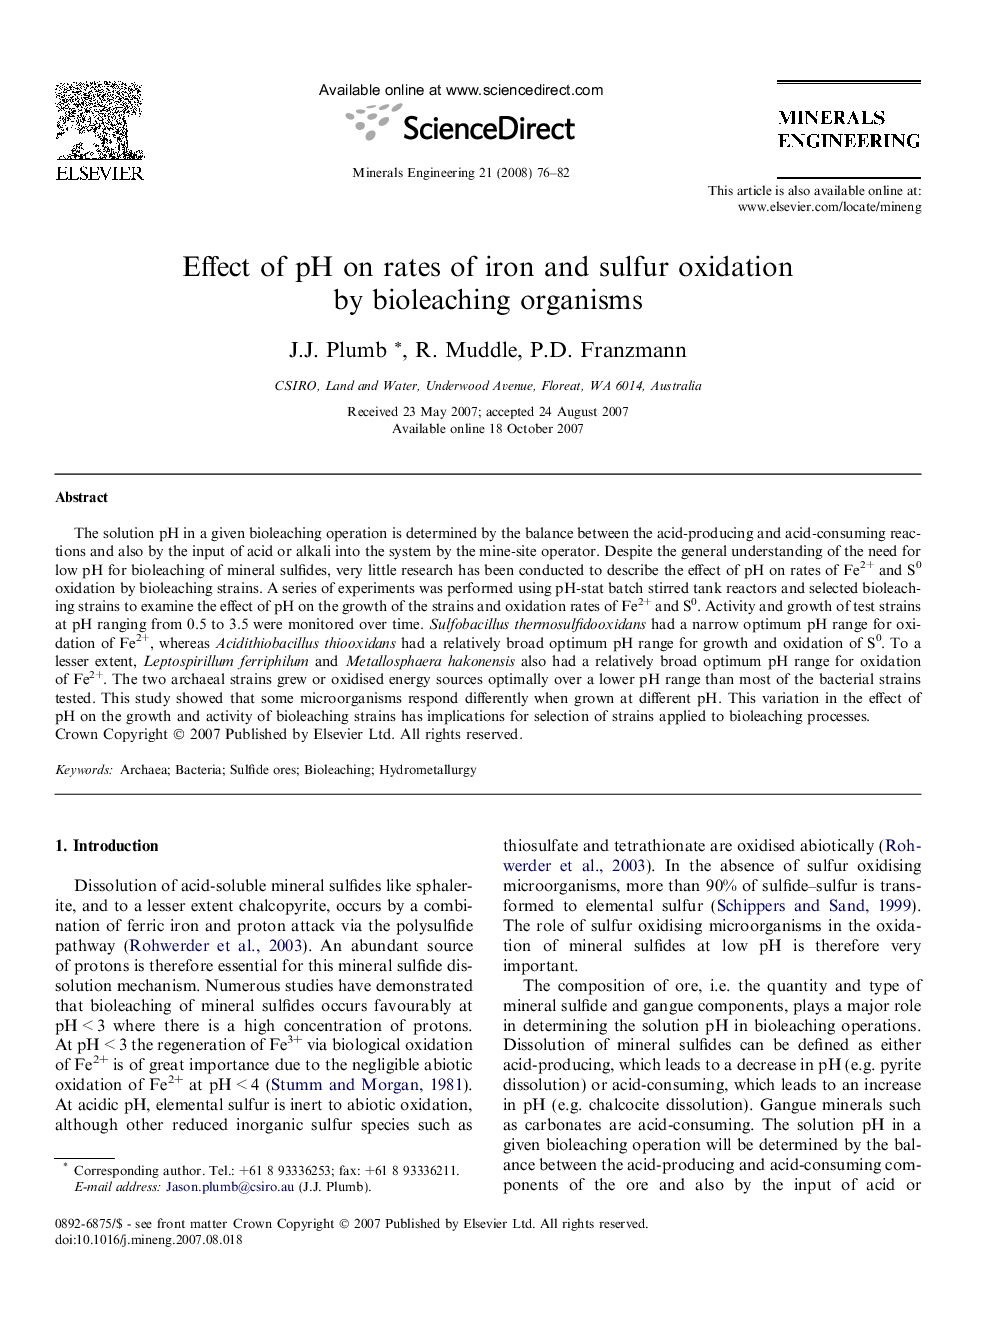 Effect of pH on rates of iron and sulfur oxidation by bioleaching organisms